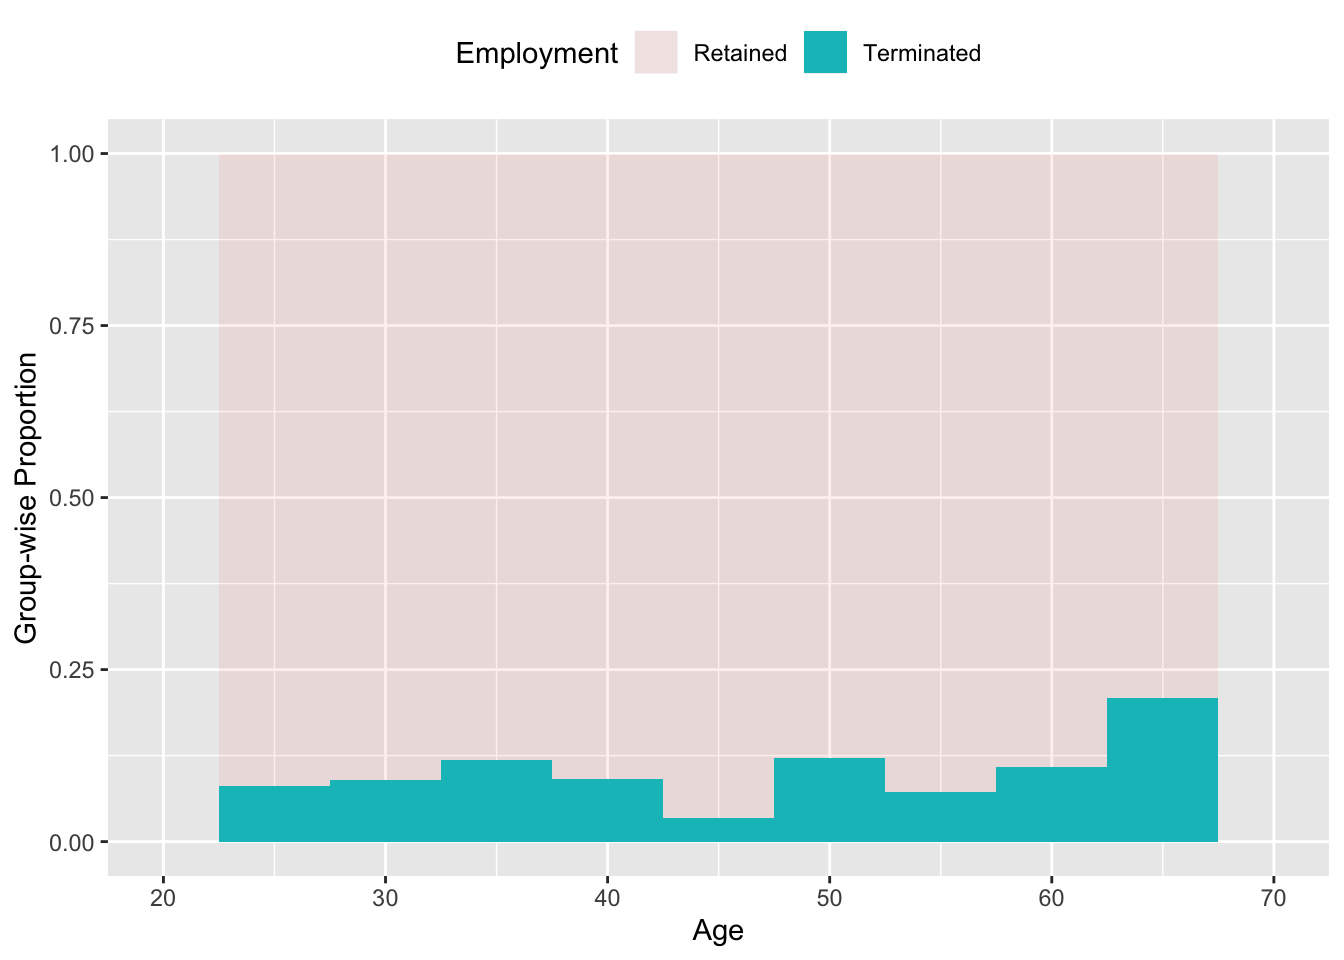 The proportion of workers who were terminated broken into groups according to age.